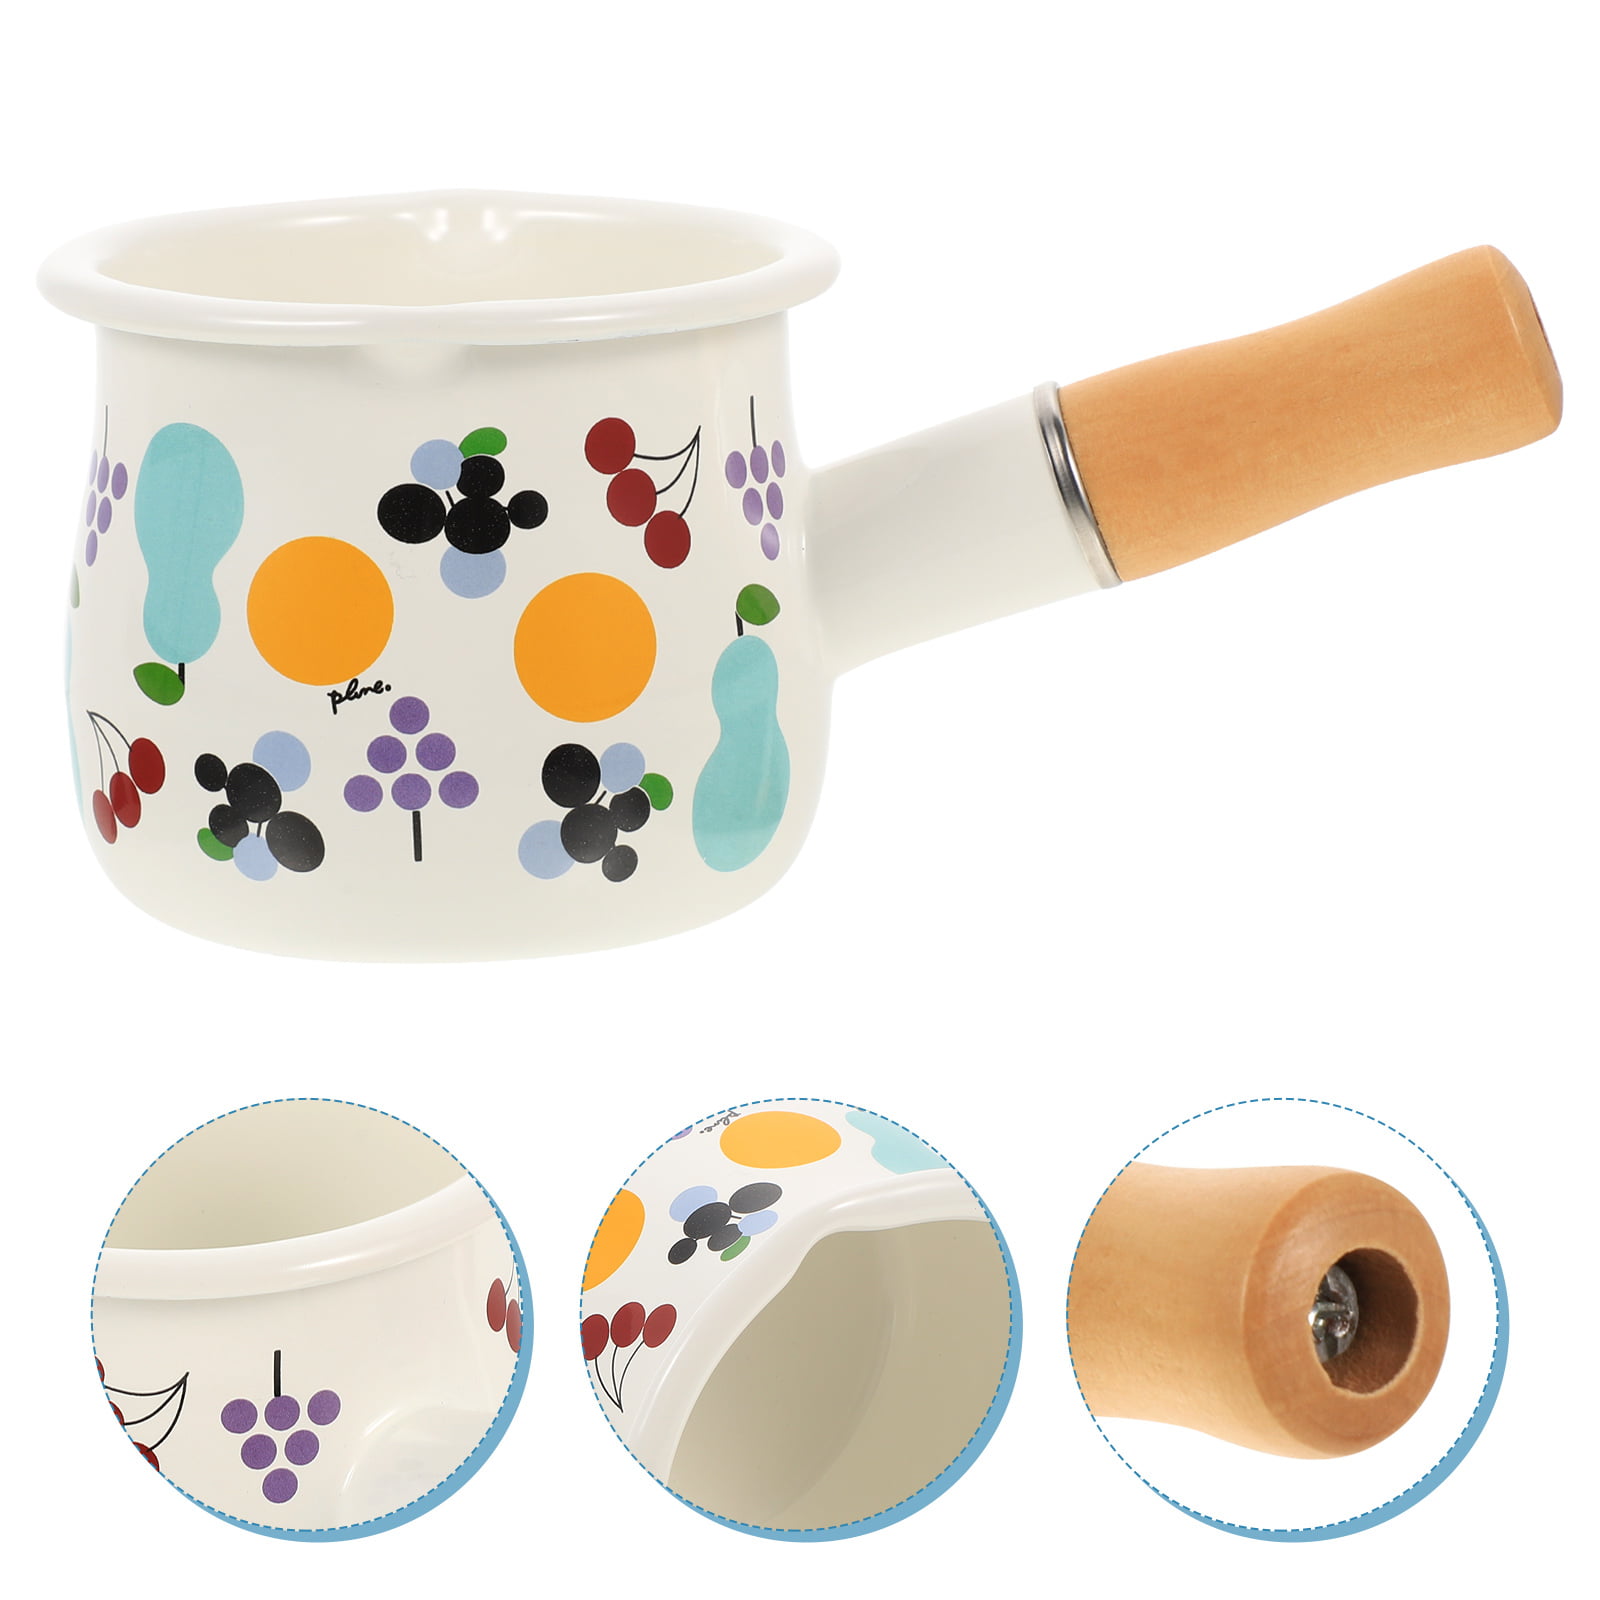 Milk Pan-Milk Pot Non stick Mini Saucepan Butter Warmer with Wooden Handle  Small Cookware, Perfect Size for Heating Smaller Liquid Portions 